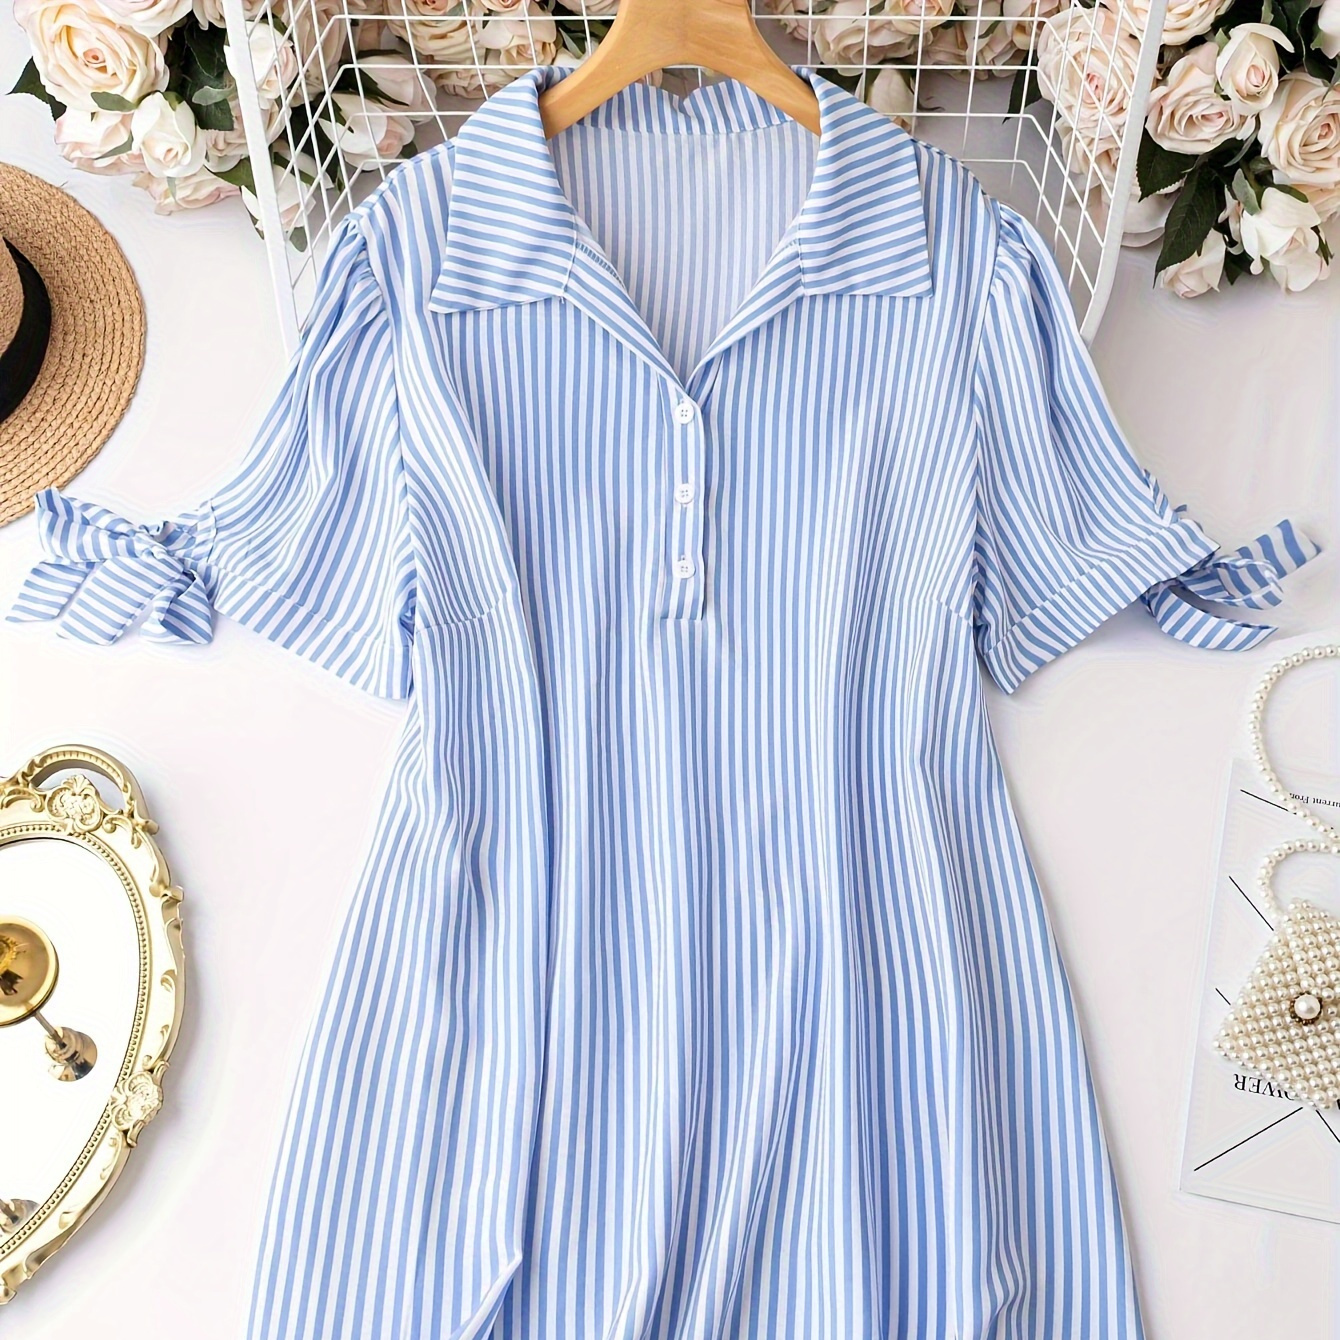 

Plus Size Stripe Print Shirt Dress, Casual Knot Short Sleeve Button Front Collared Dress For Spring & Summer, Women's Plus Size Clothing